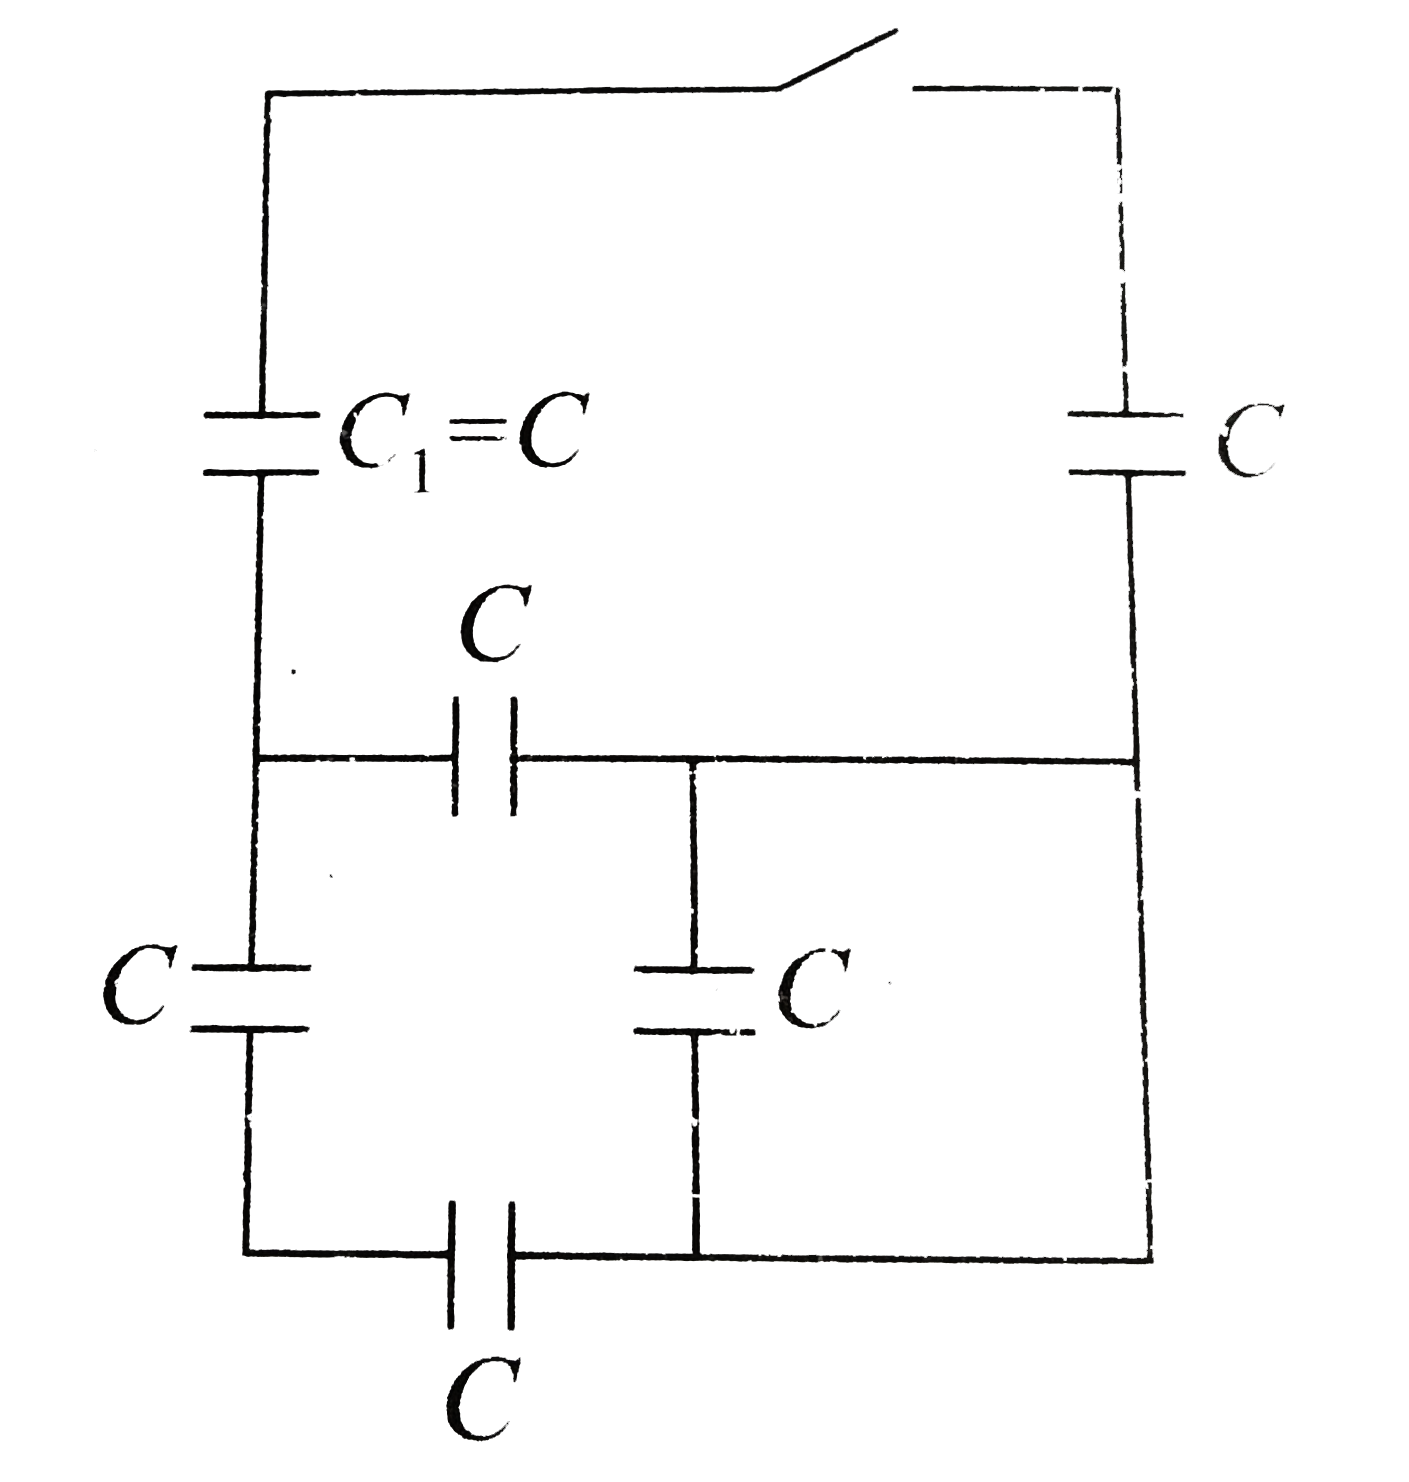 In the circuit shown, all capacitors are identical. Initially, the switch is open and the capacitor marked C1 is the only one charged to a value Q0. After the switch is closed and the equilibrium is reestablished, the charge on the capacitor marked C1 is Q. Find the ratio initial change to final charge in capacitor C1.